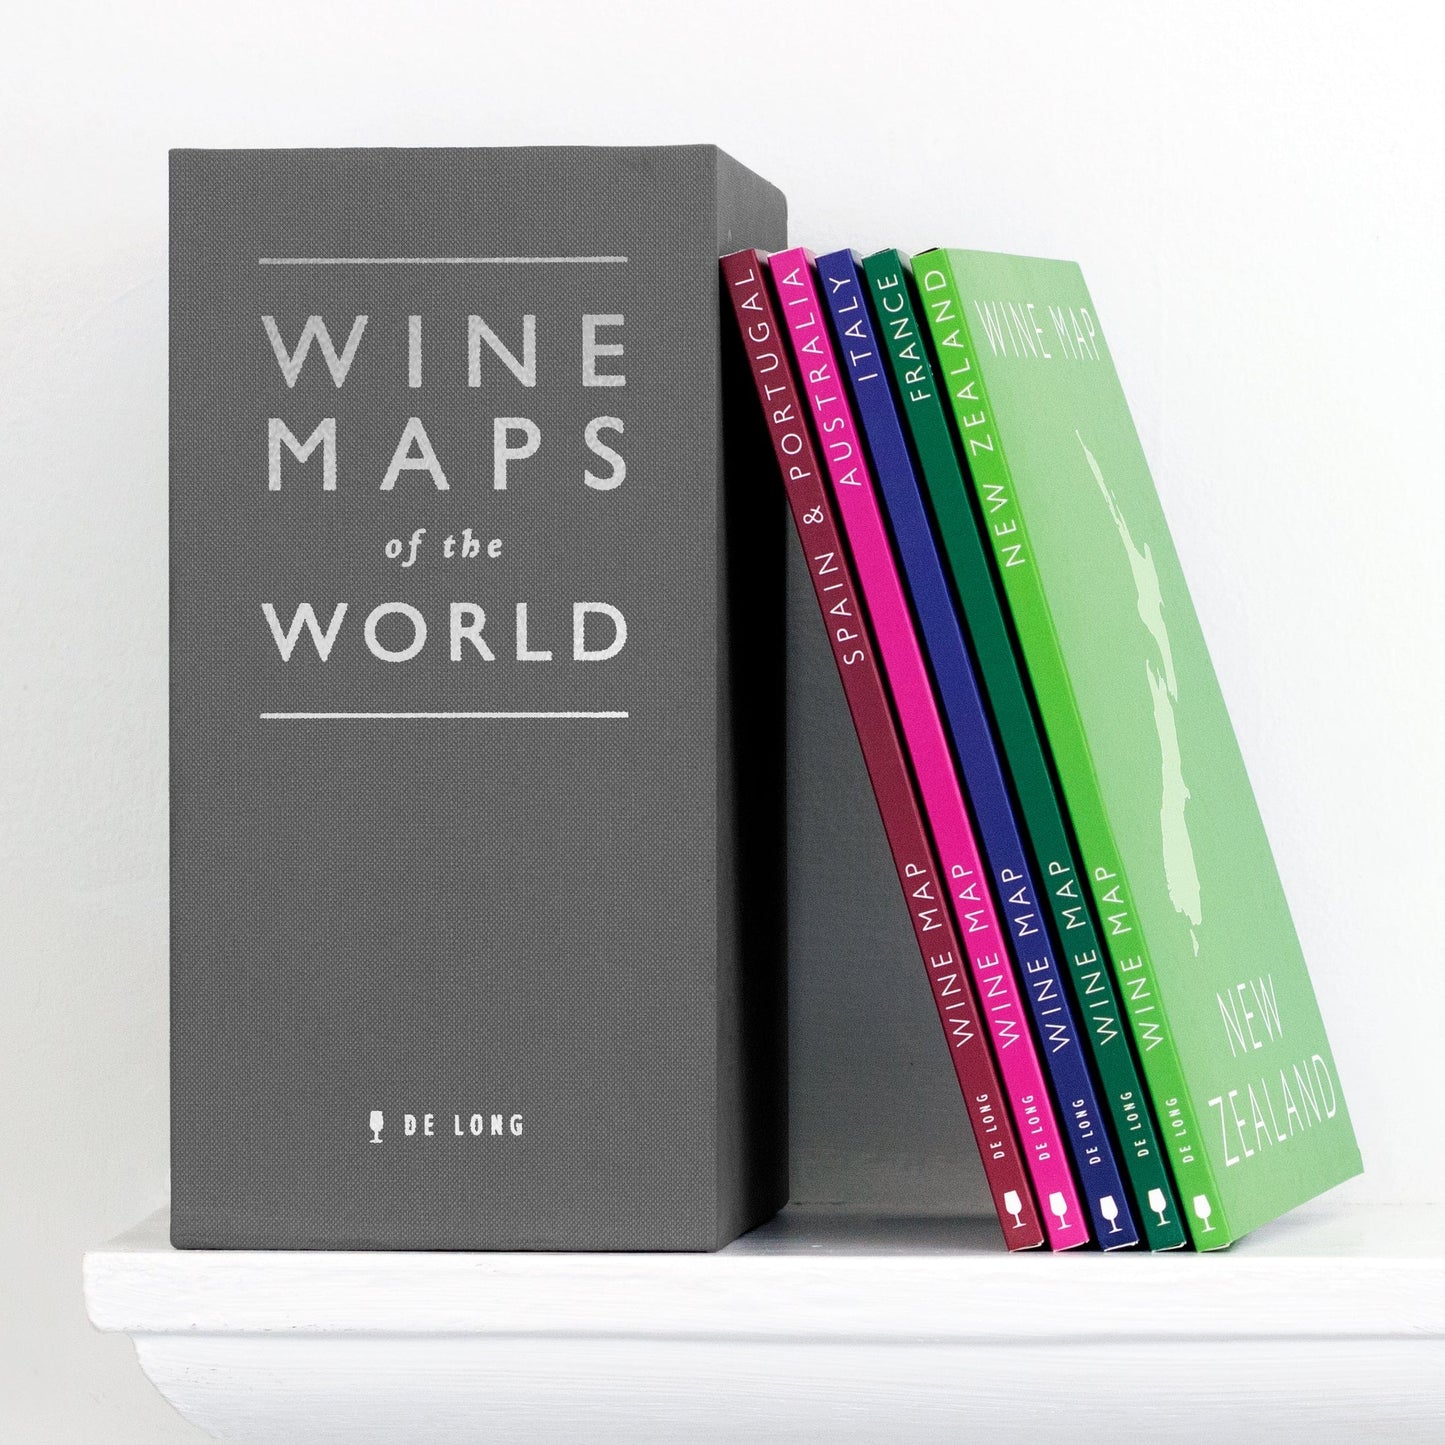 Wine maps of the world, the boxed set